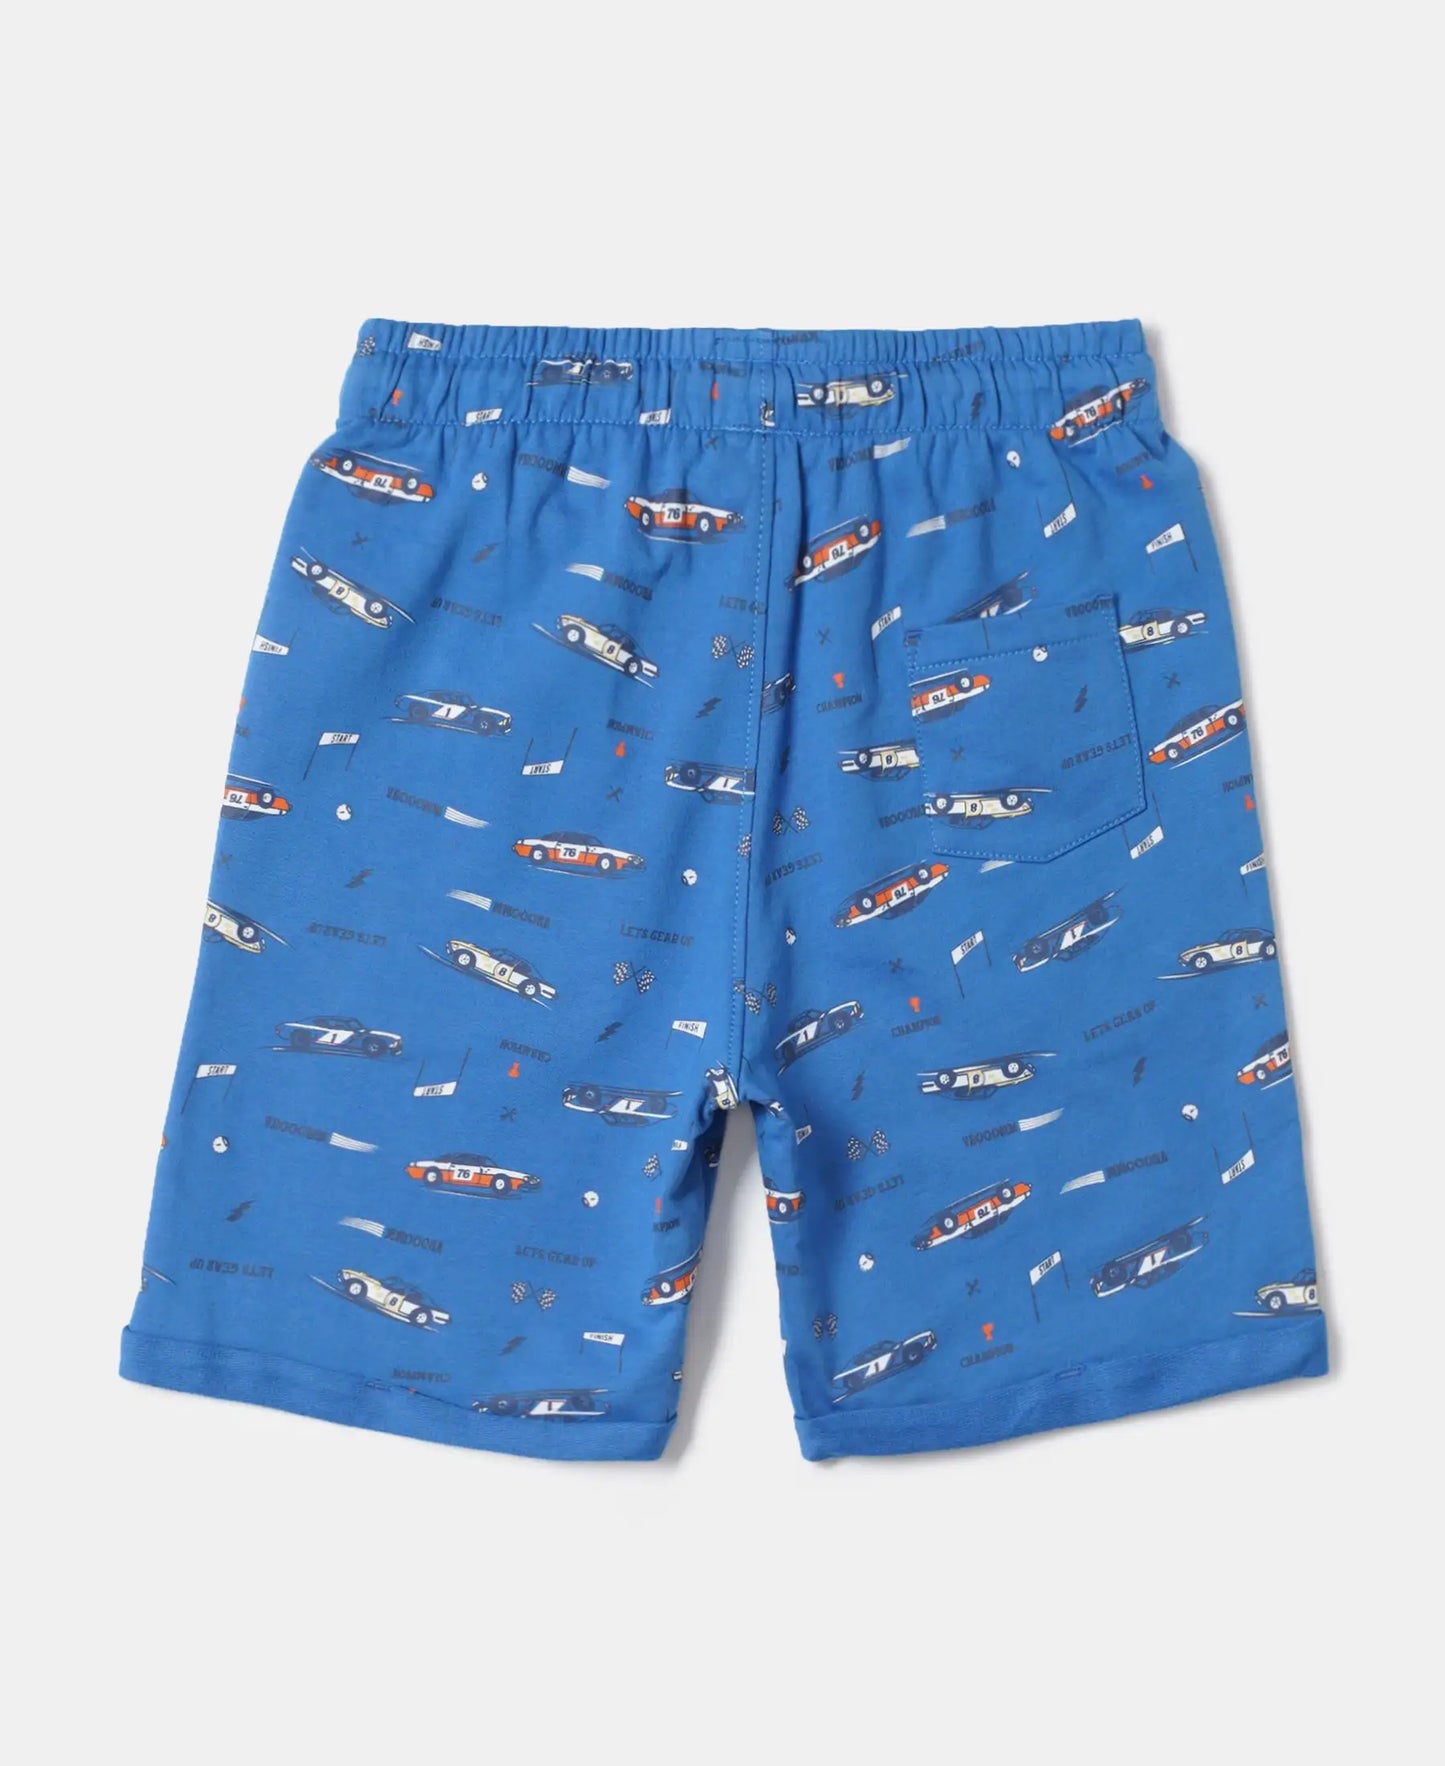 Super Combed Cotton French Terry Printed Shorts with Turn Up Hem Styling - Palace Blue-2